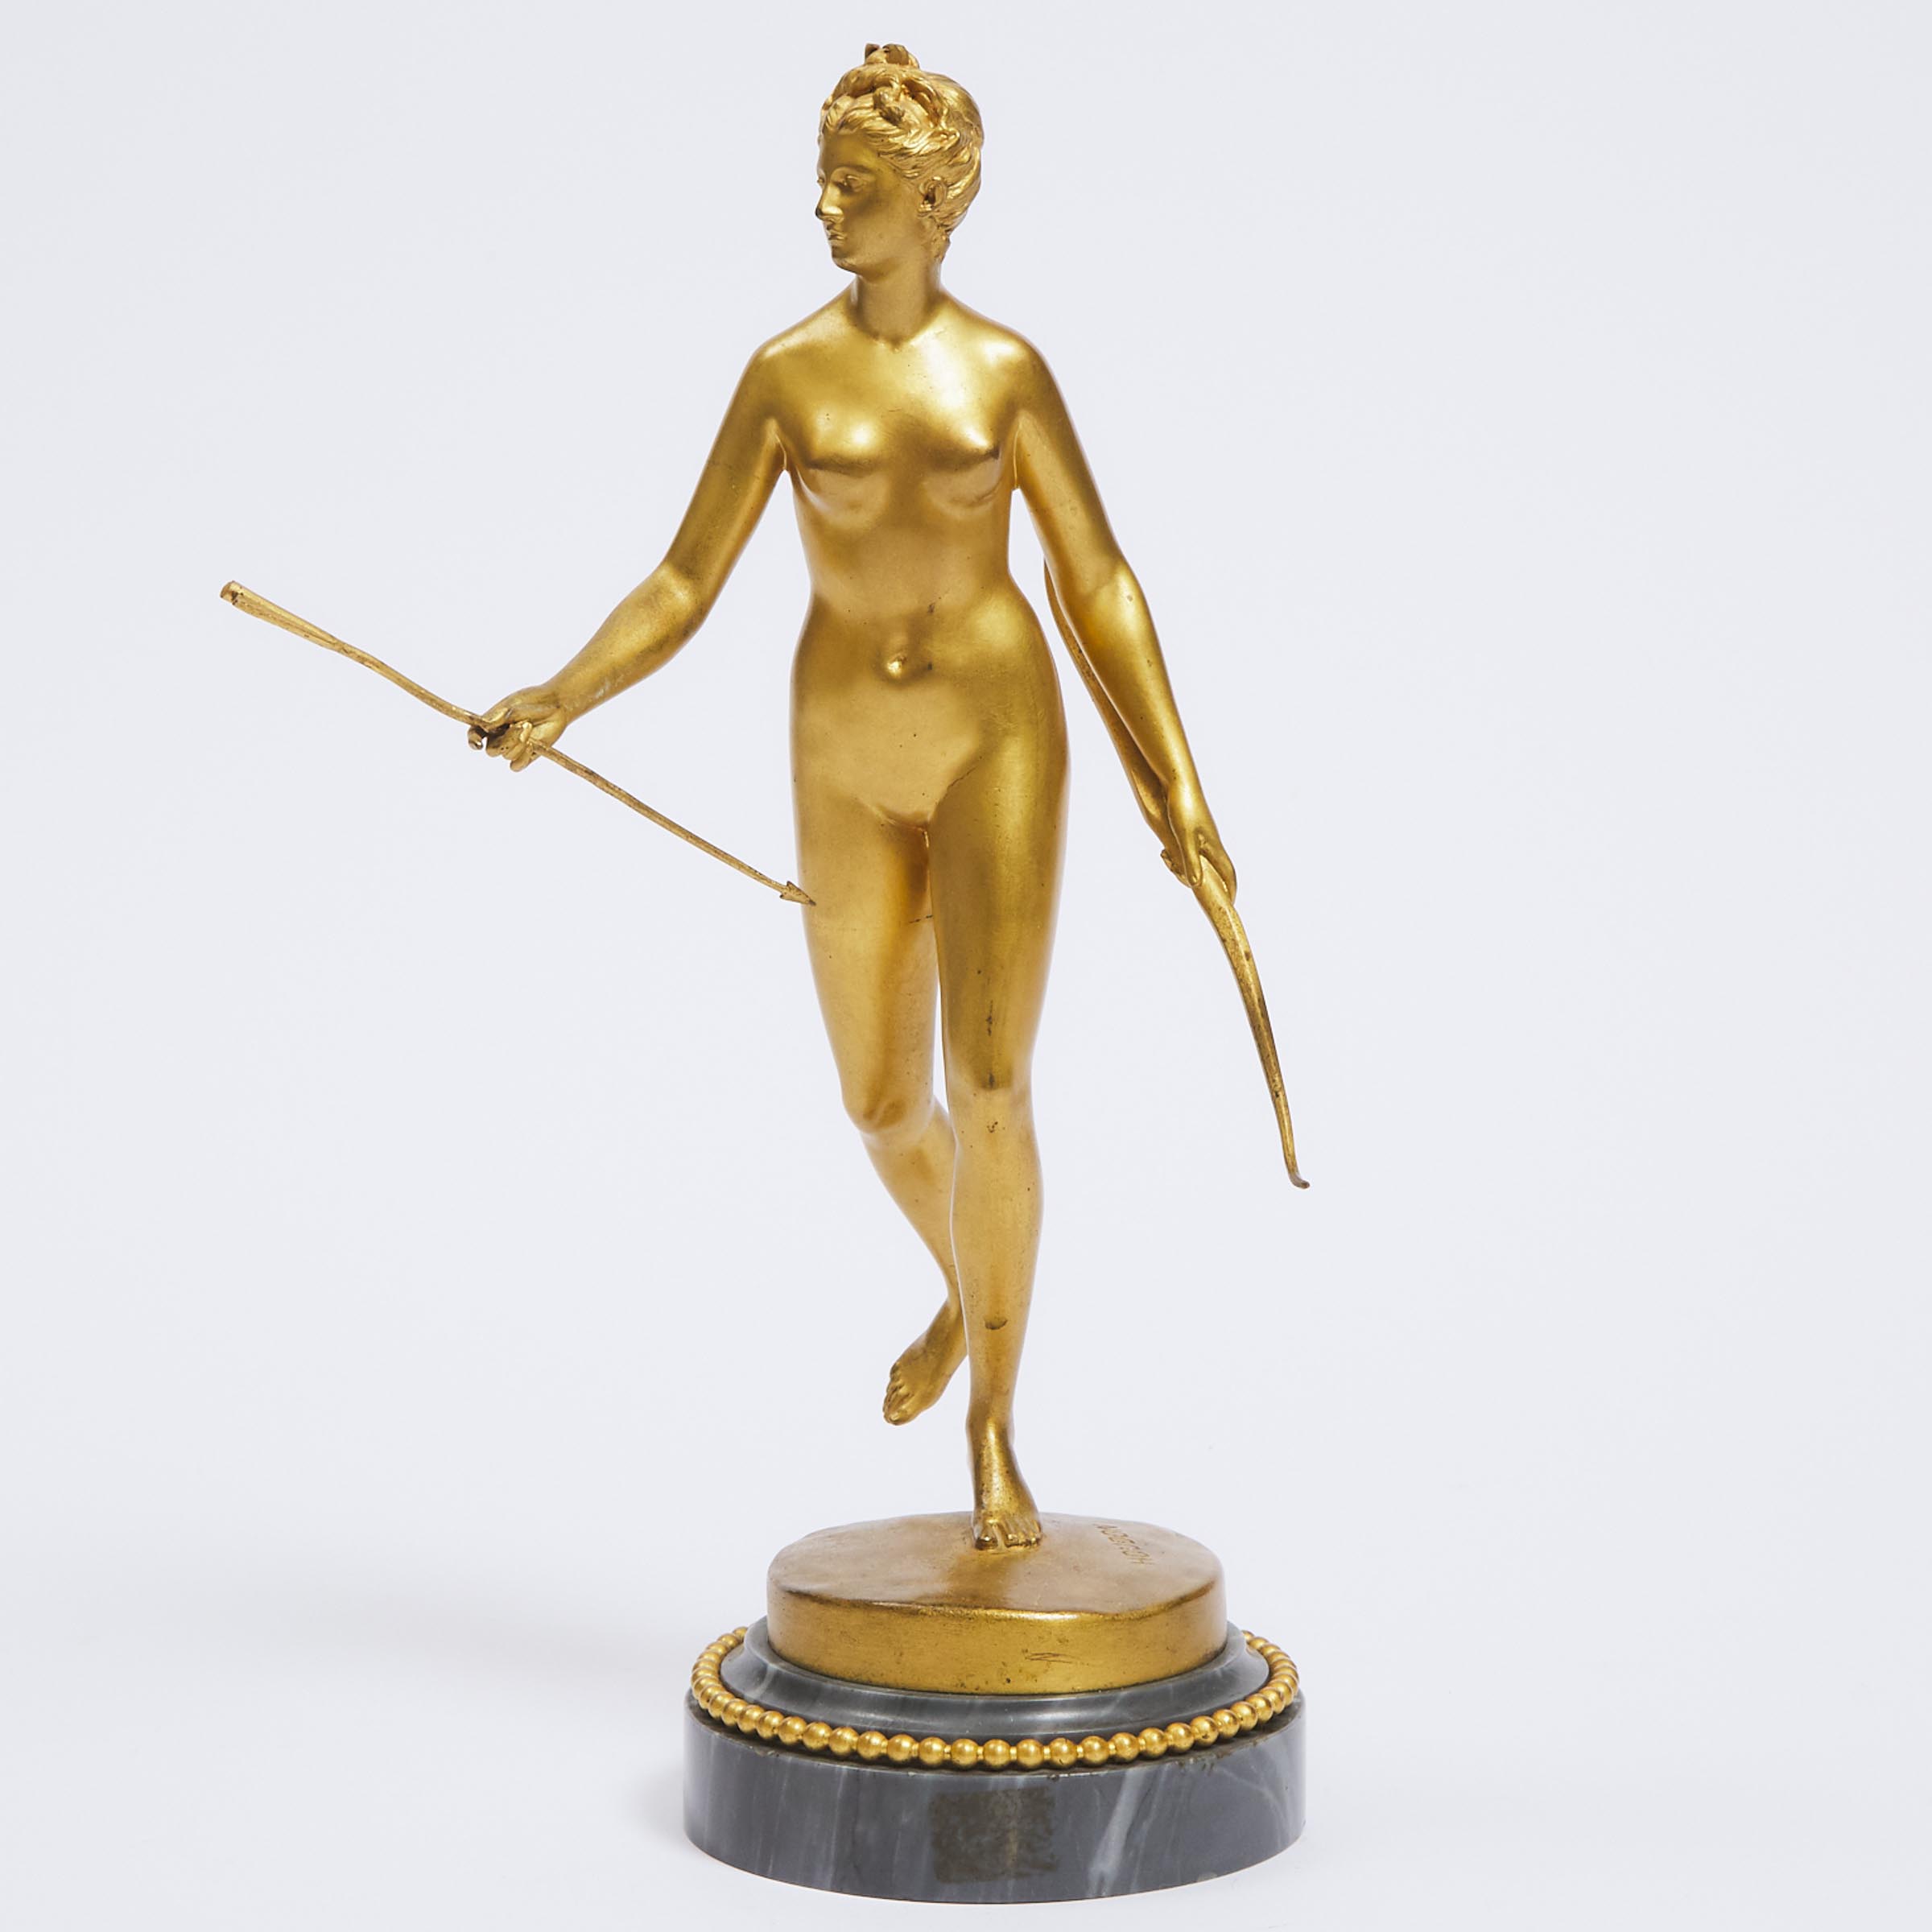 Barbedienne Gilt Bronze Figure of Diana, Goddess of the Hunt, after Houdon, late 19th century